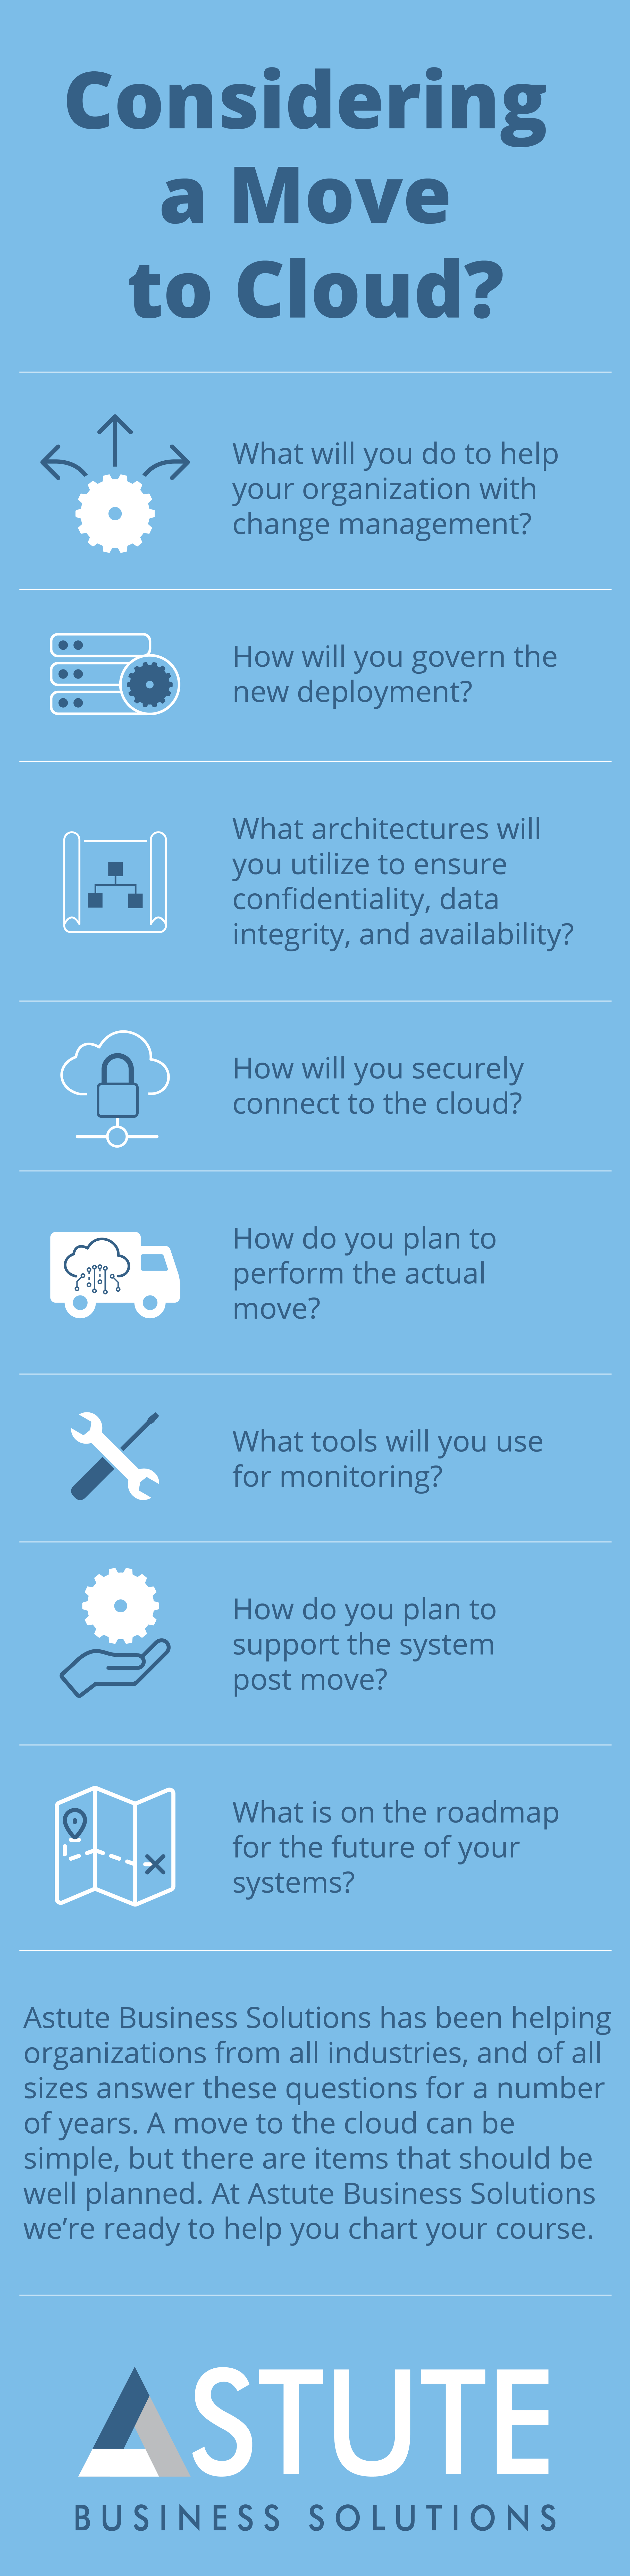 Questions to Consider For Your Cloud Move